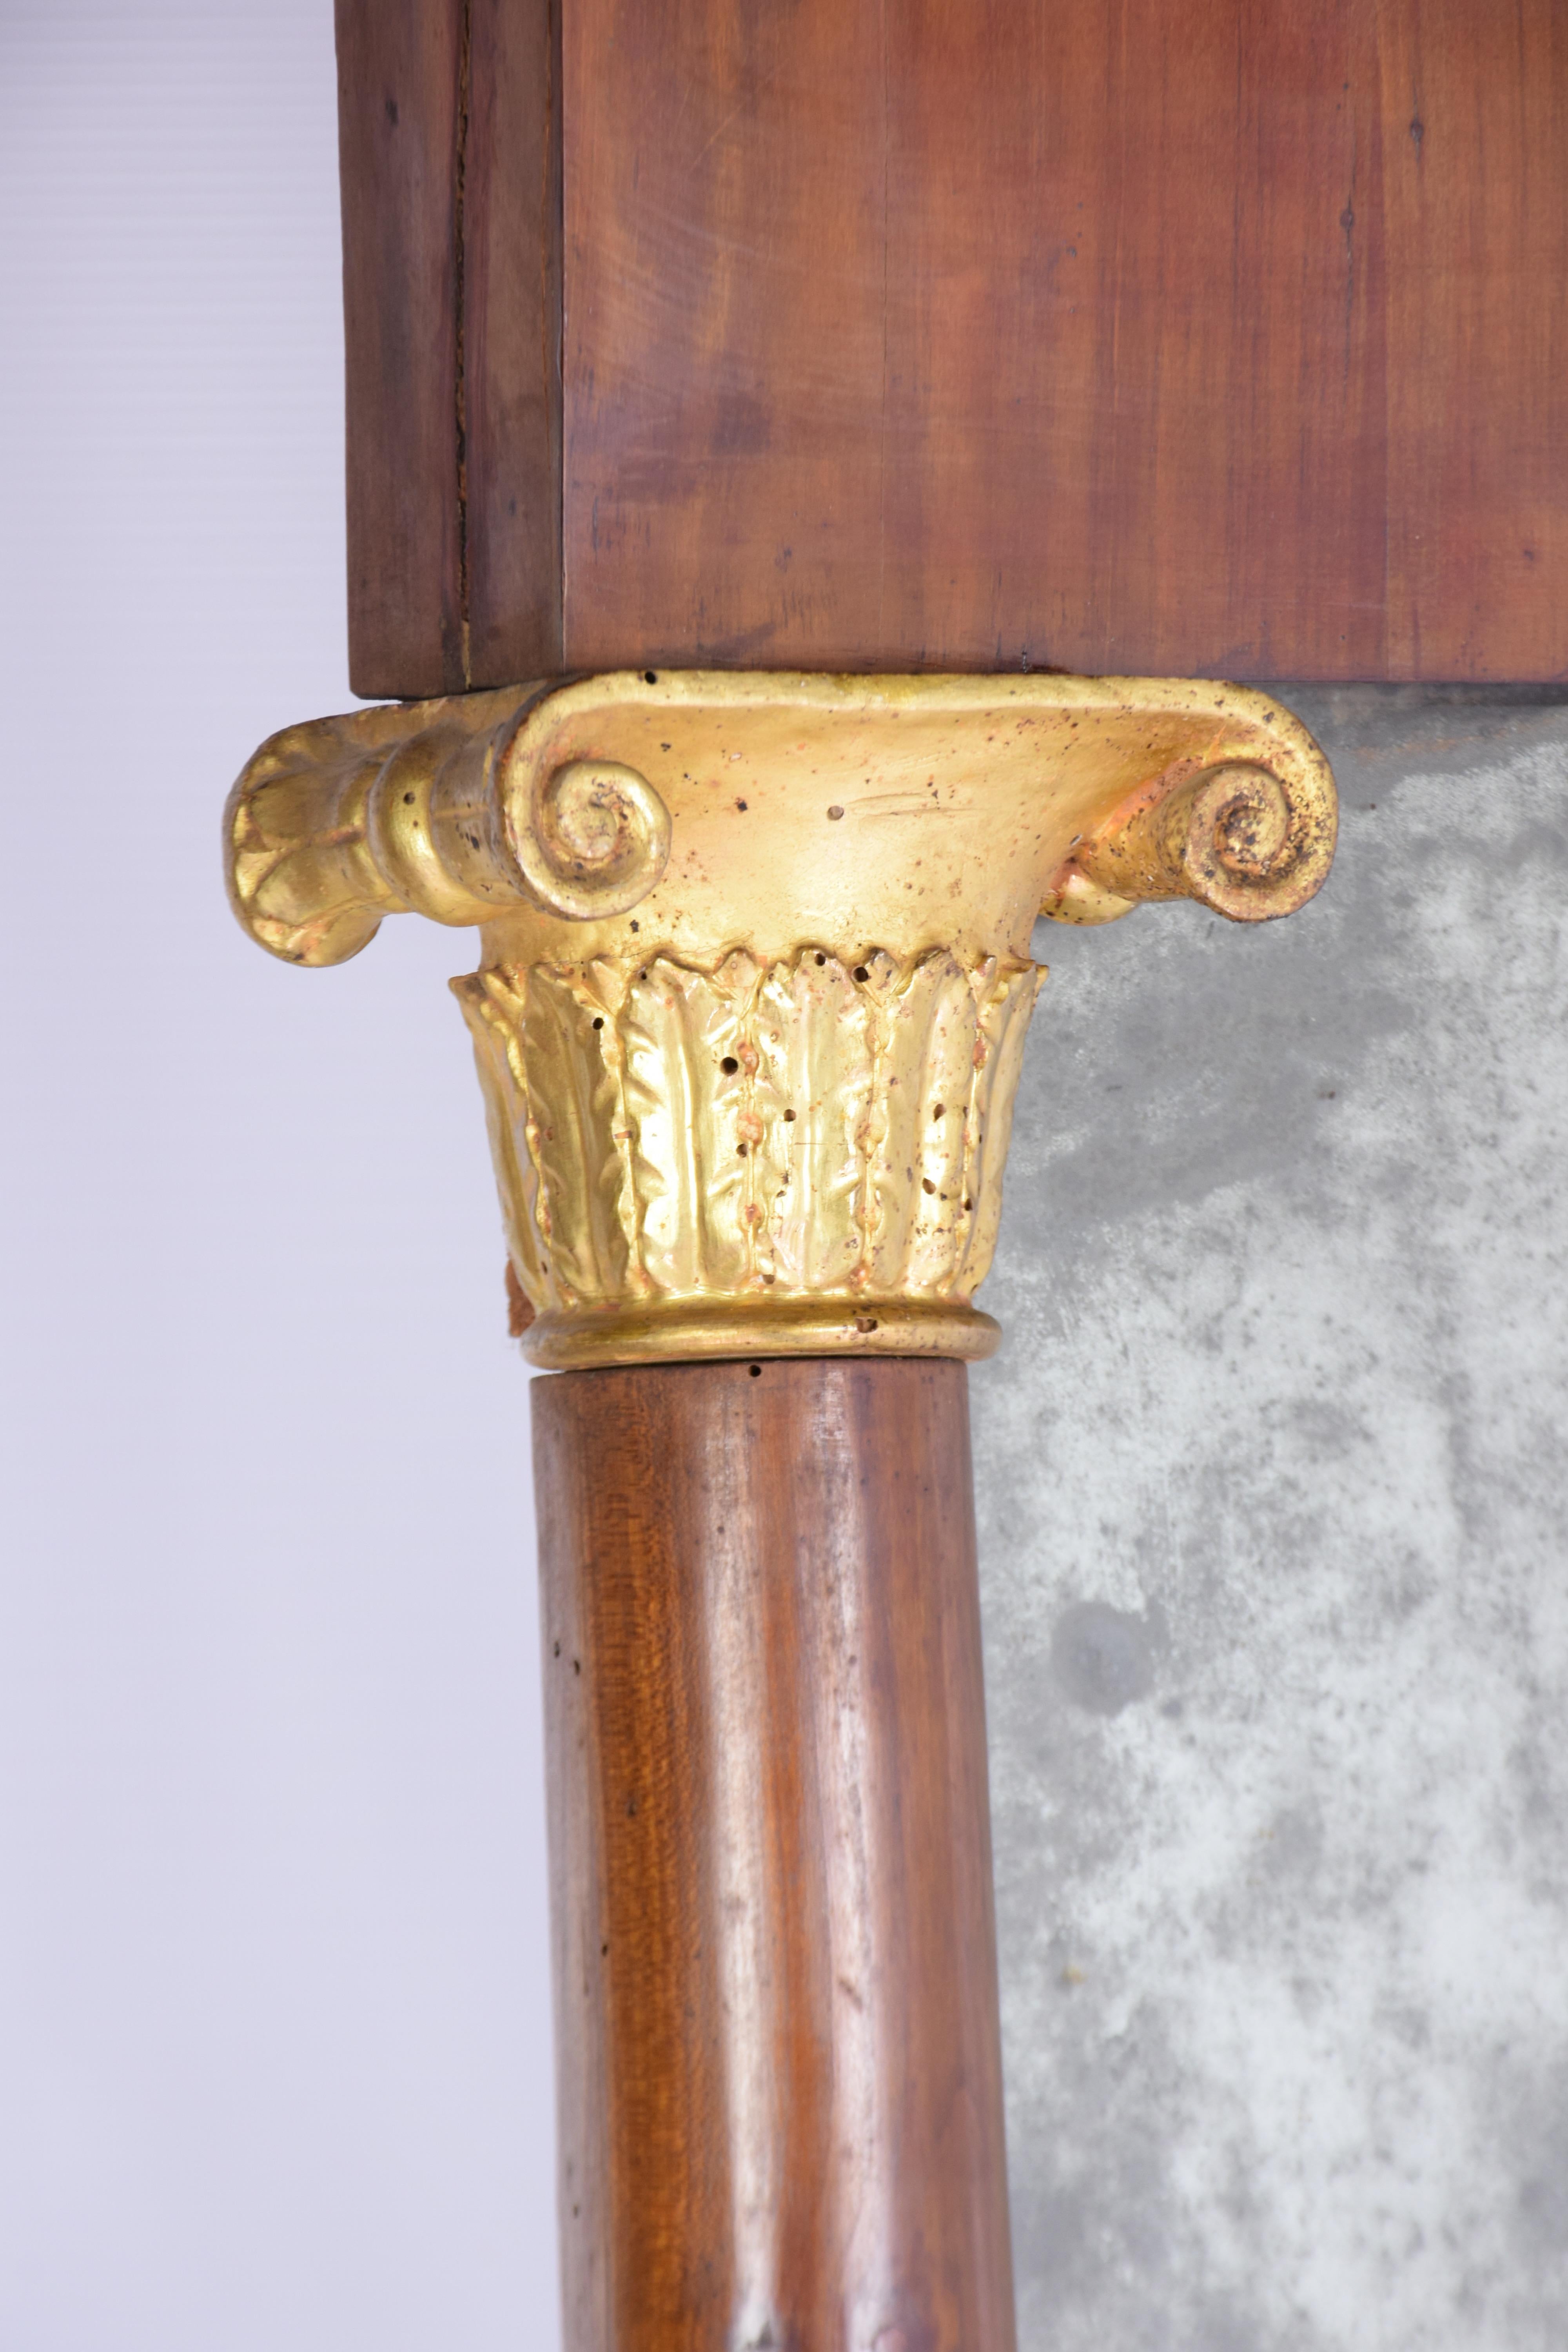 Lucca Tuscany, early 19th century
Cherry veneer
Antique mirror
Capitals, bases, feet and central carving gilded with pure gold.
Dimensions: W 77 x H 150 cm.